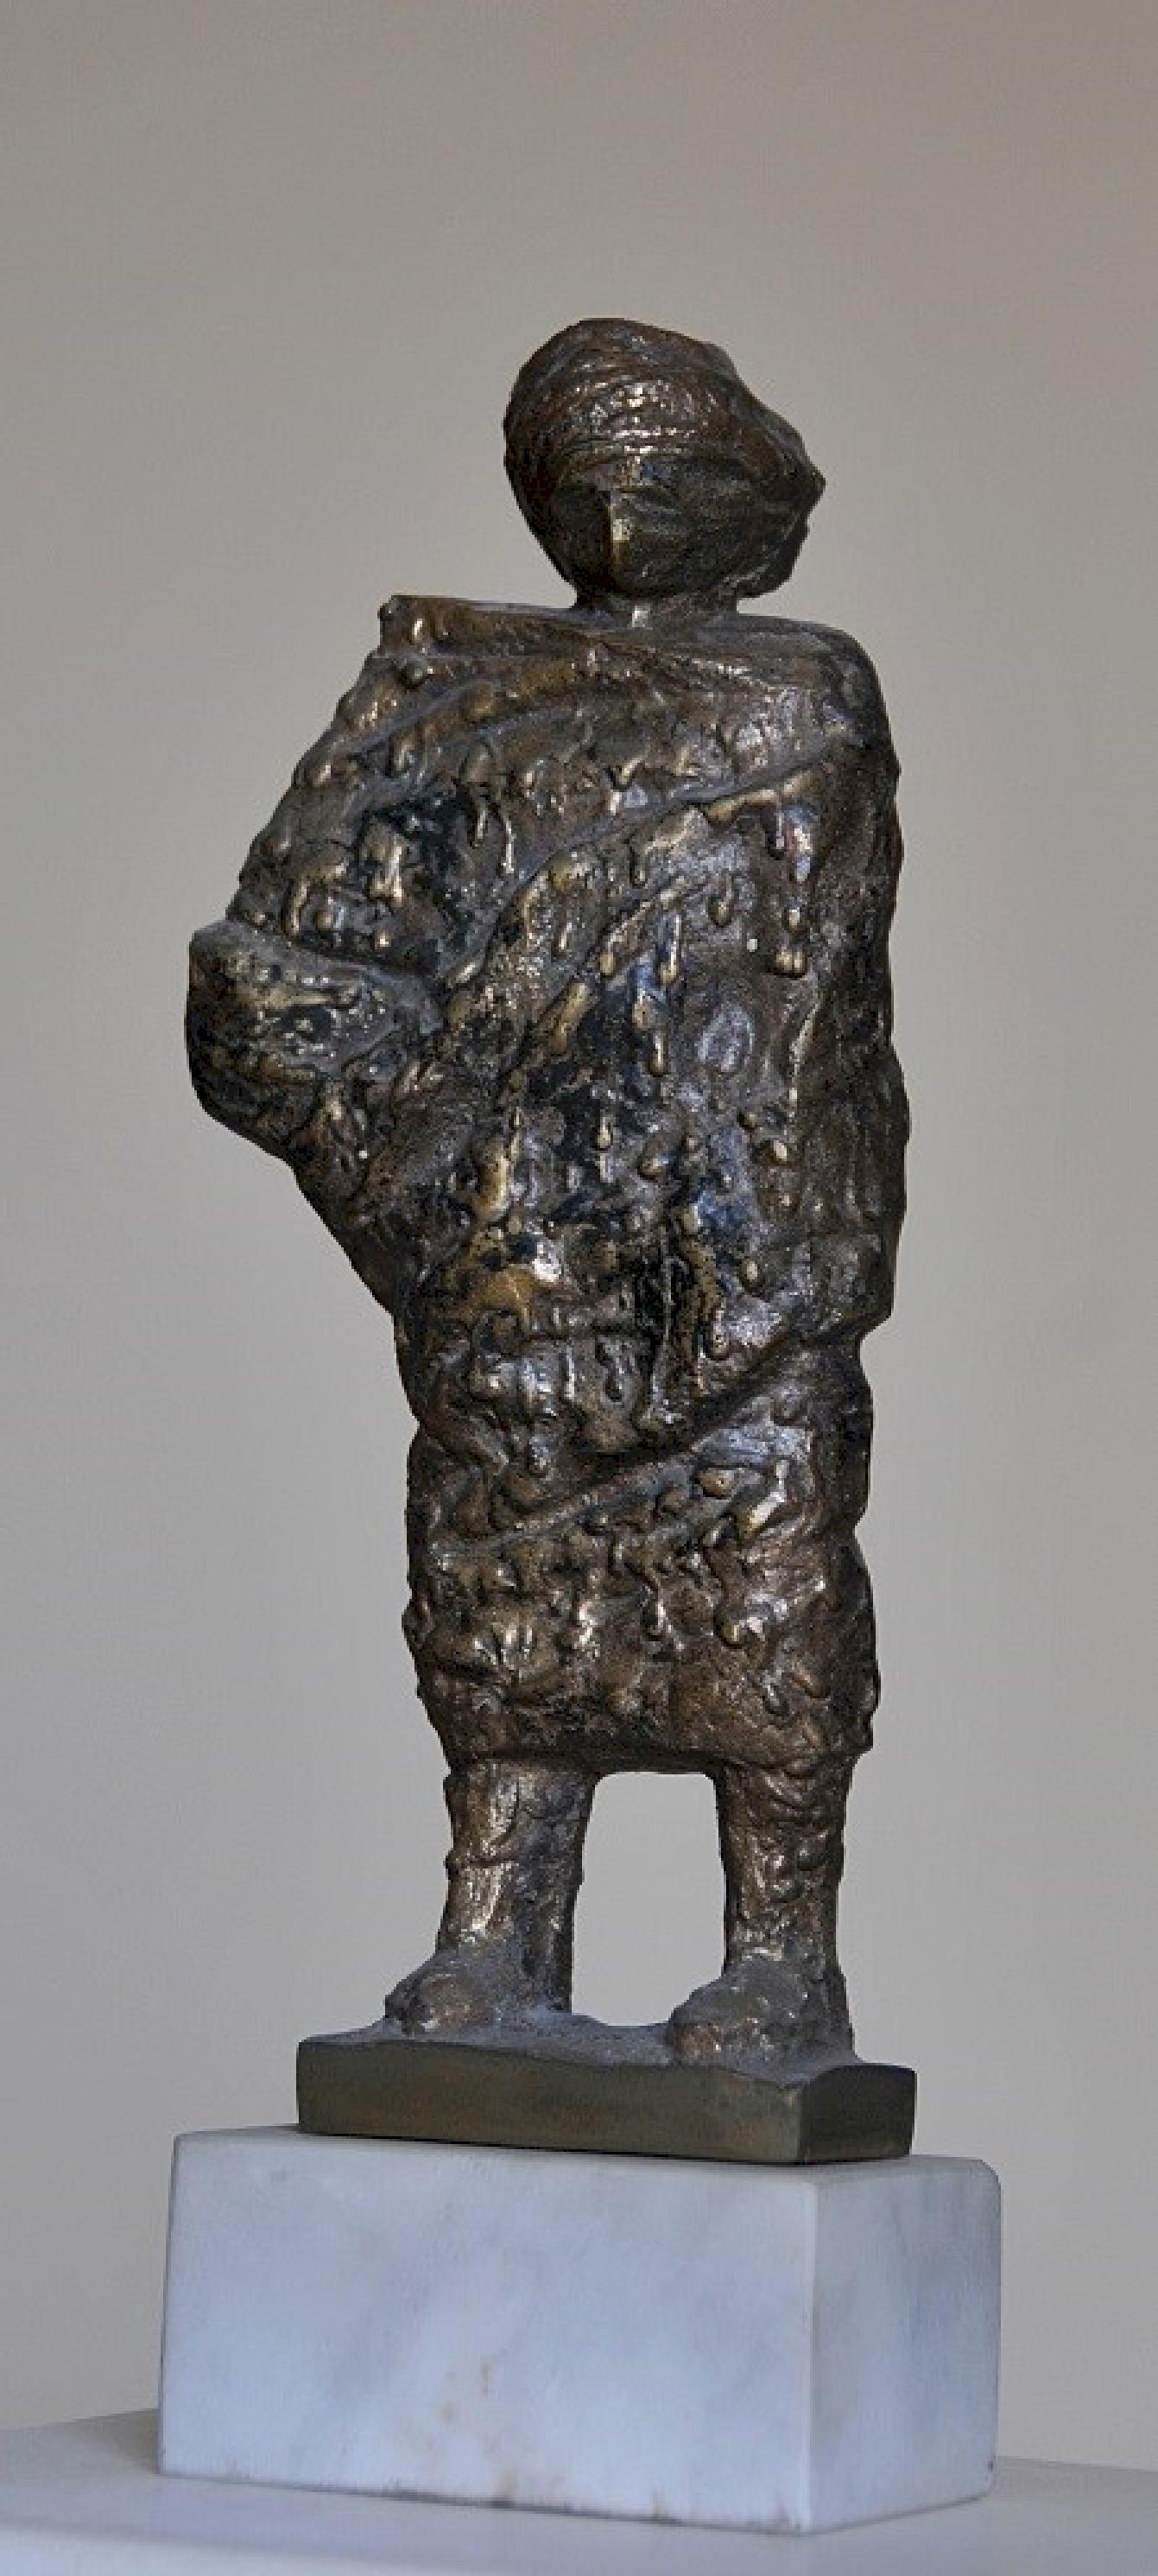 "Robed I" Bronze Sculpture 11" x 4" x 2" inch by Sarkis Tossonian

Sarkis Tossoonian was born in Alexandria in 1953. He graduated from the Faculty of Fine Arts/Sculpture in 1979. He started exhibiting in individual and group exhibitions in